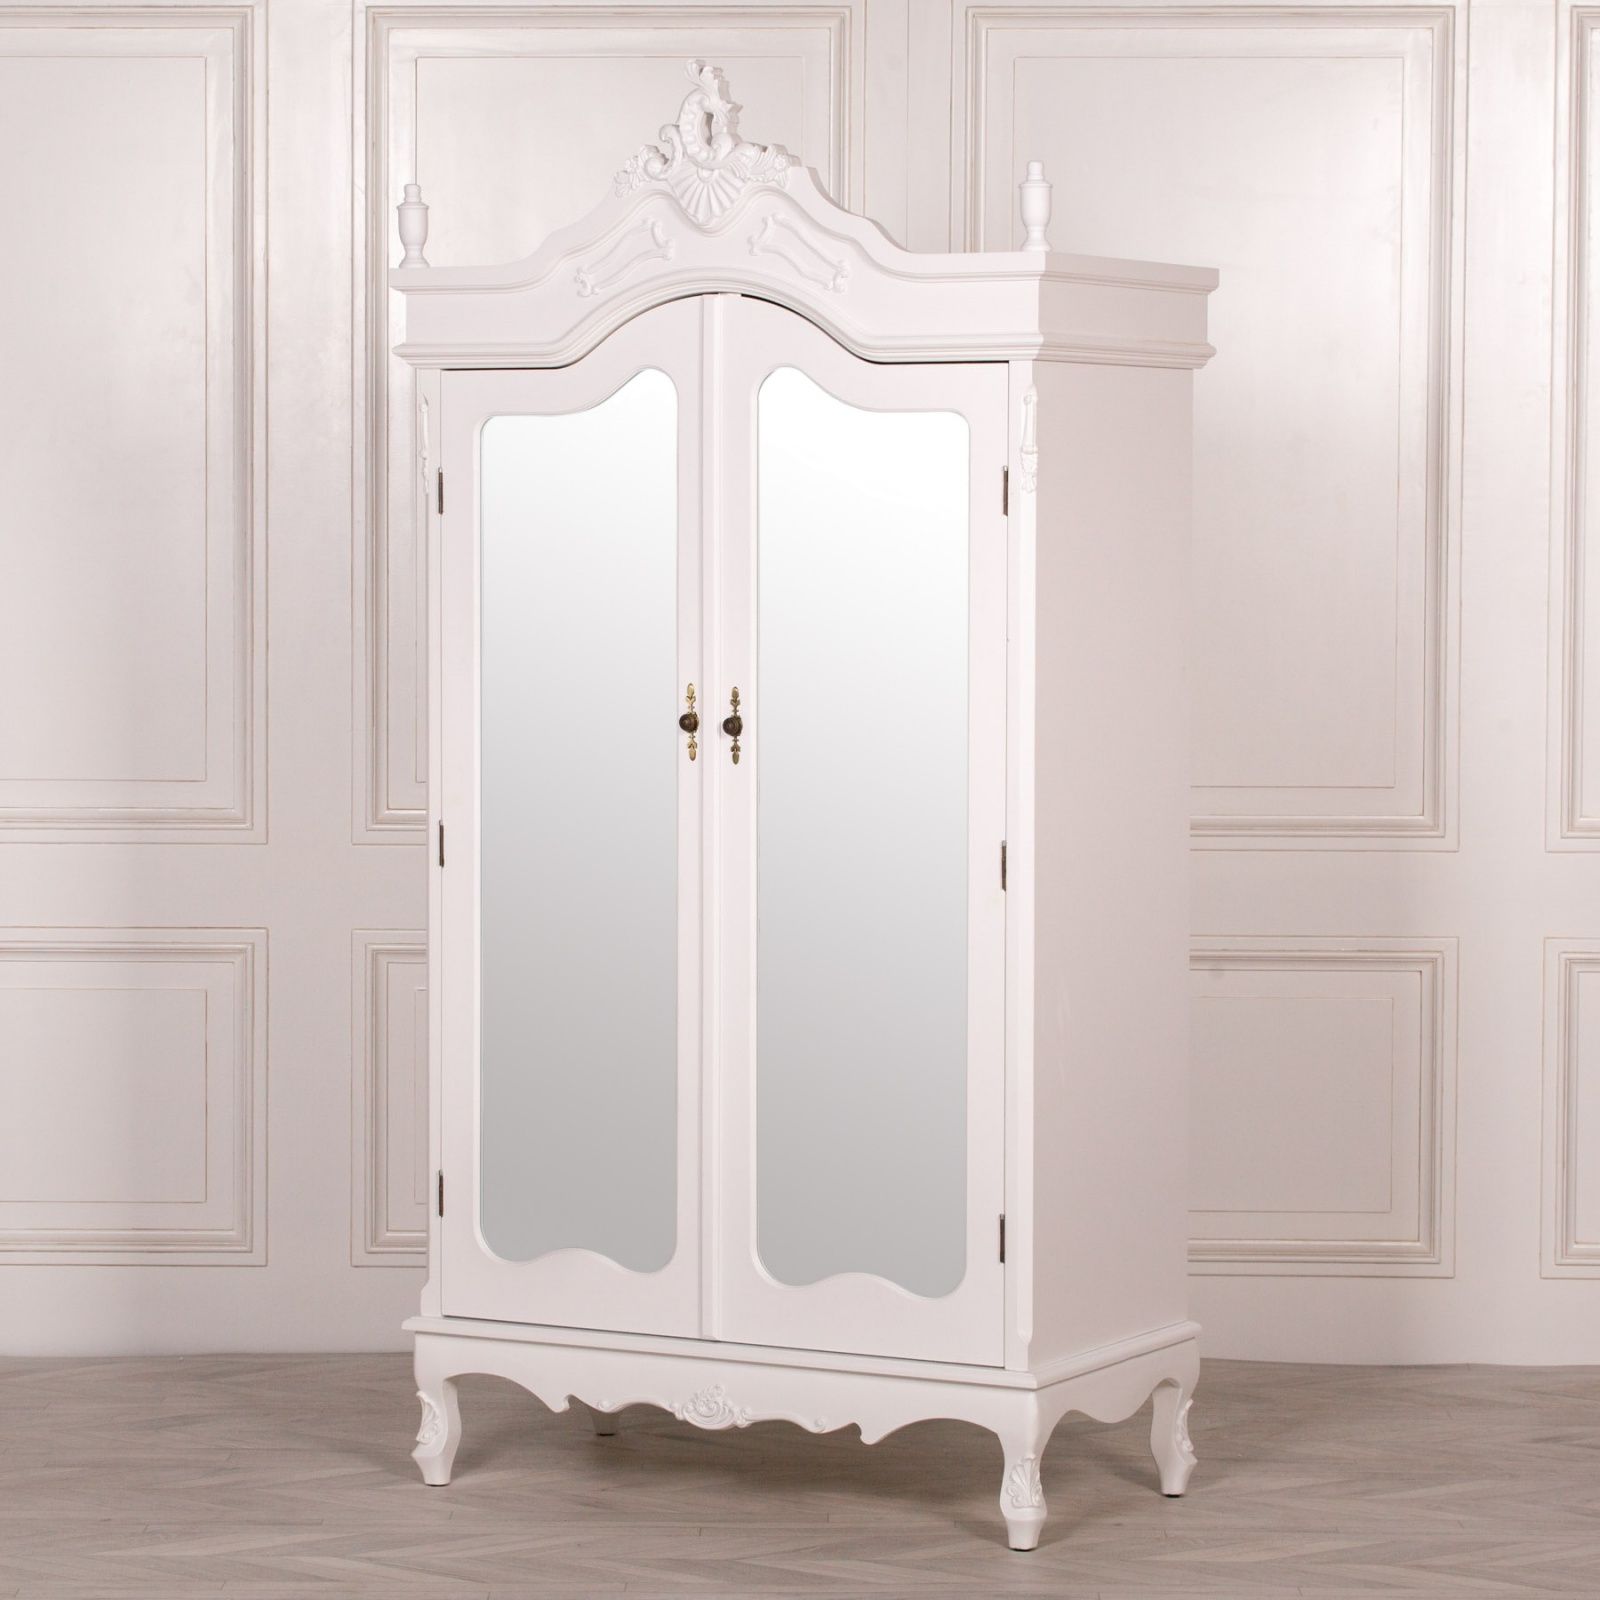 French Style Wardrobe White Mirrored Double Armoire Intended For French Style Wardrobes (View 7 of 20)